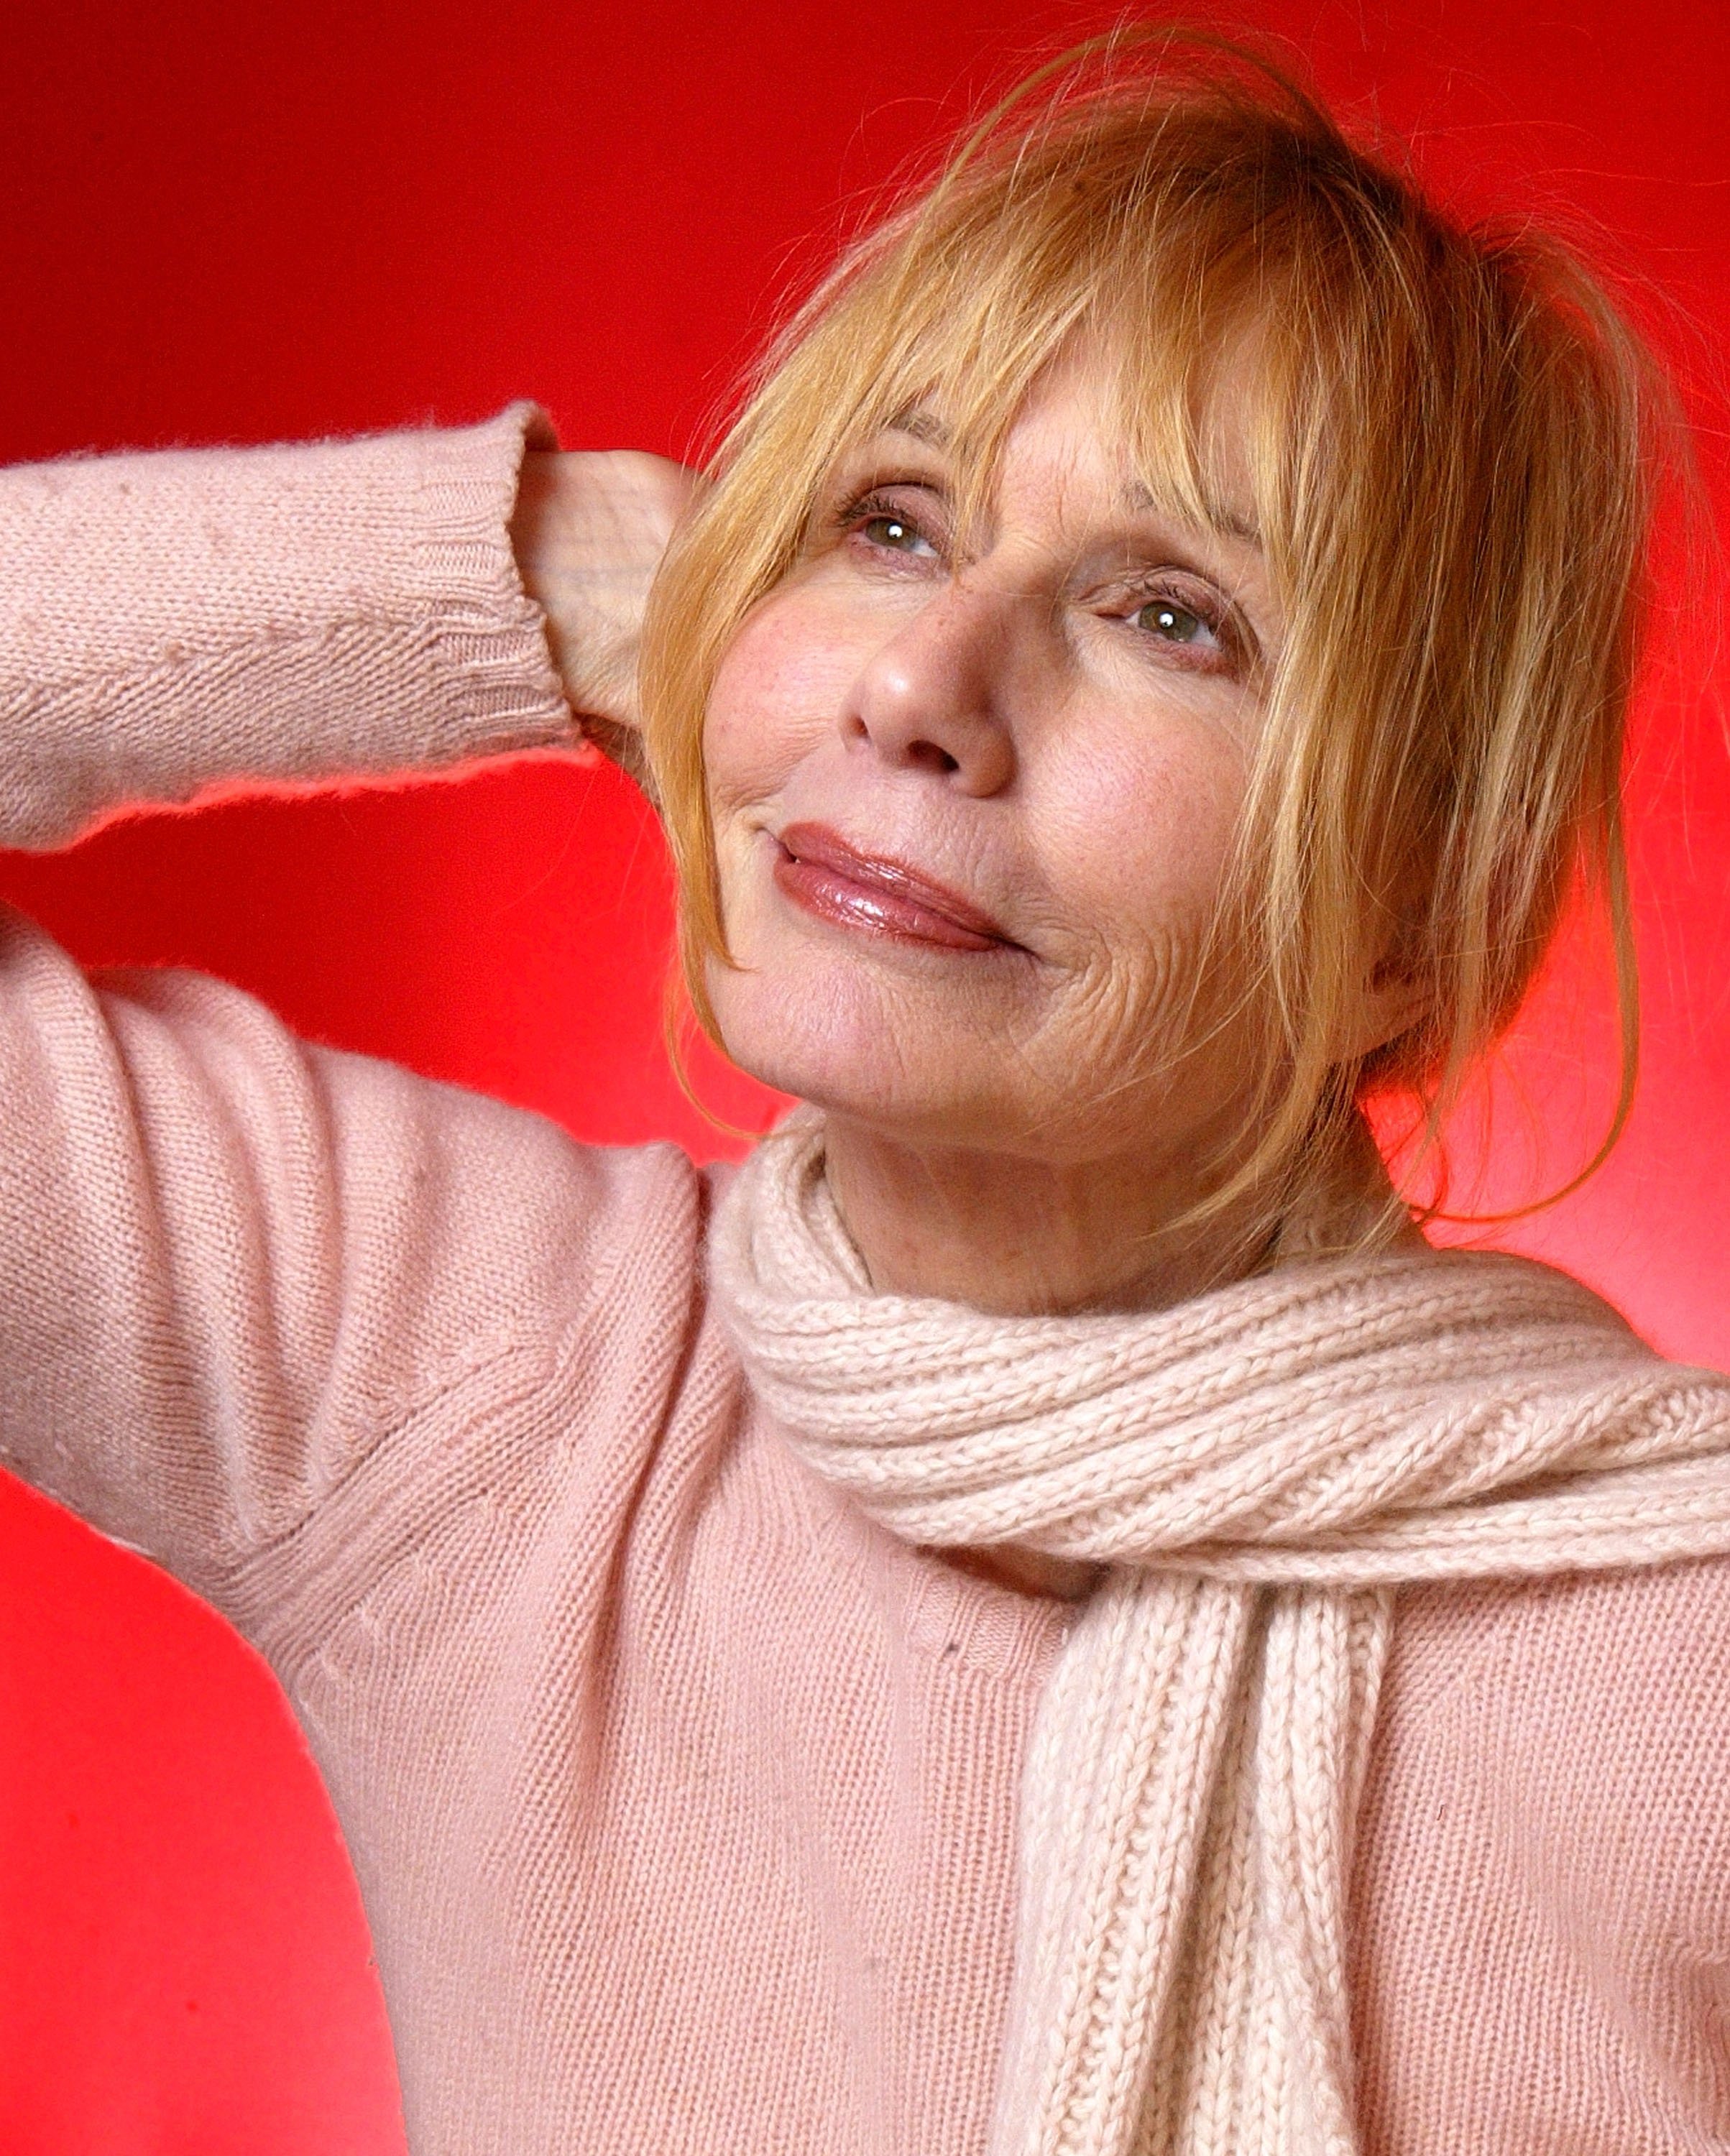 Sally Kellerman poses for portraits during the 2004 Sundance Film Festival on January 21, 2004, in Utah. | Source: Getty Images